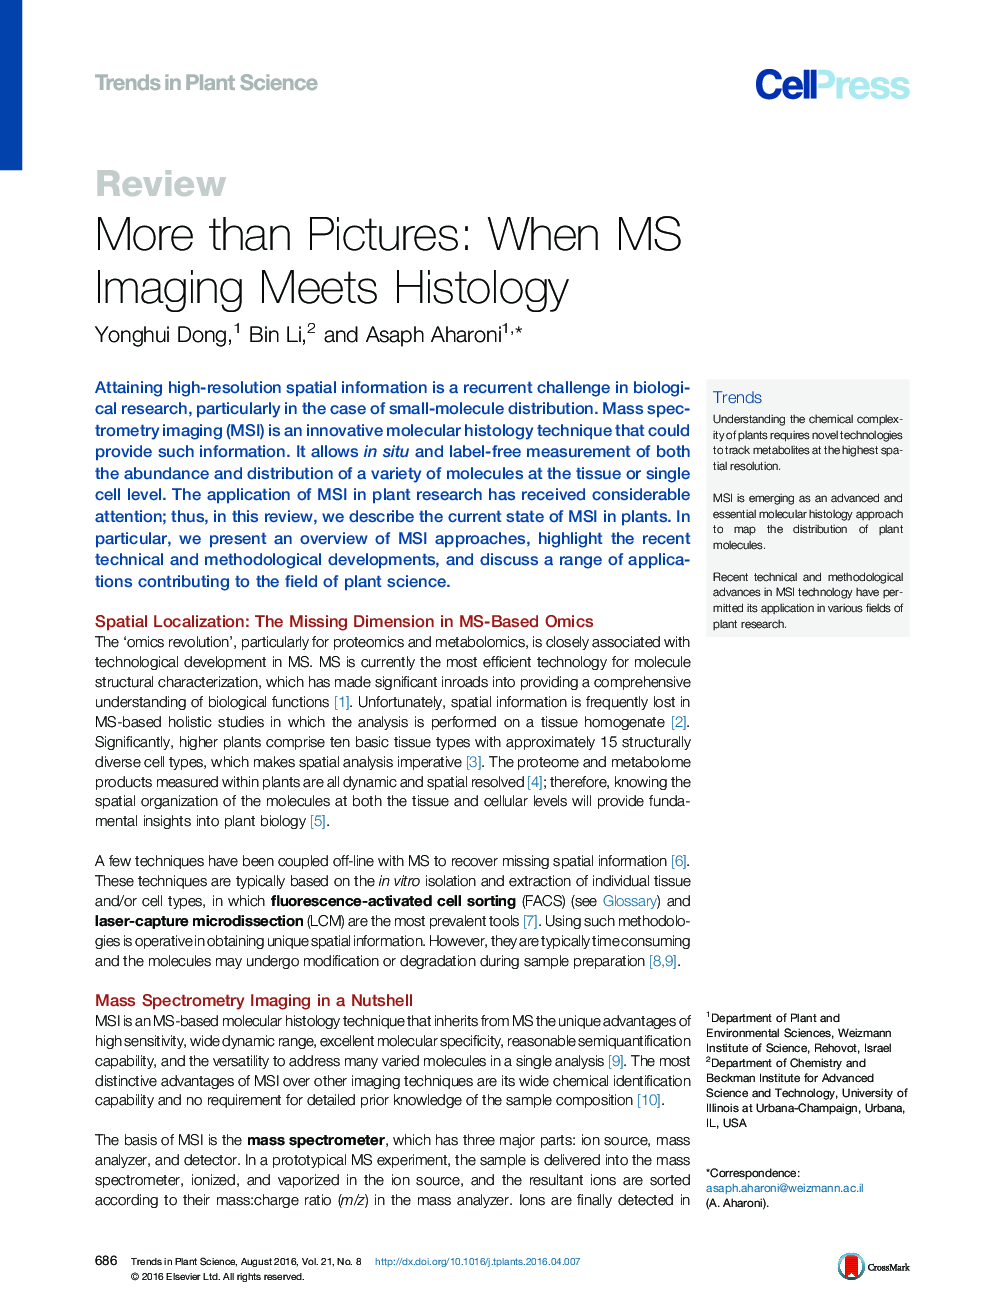 More than Pictures: When MS Imaging Meets Histology